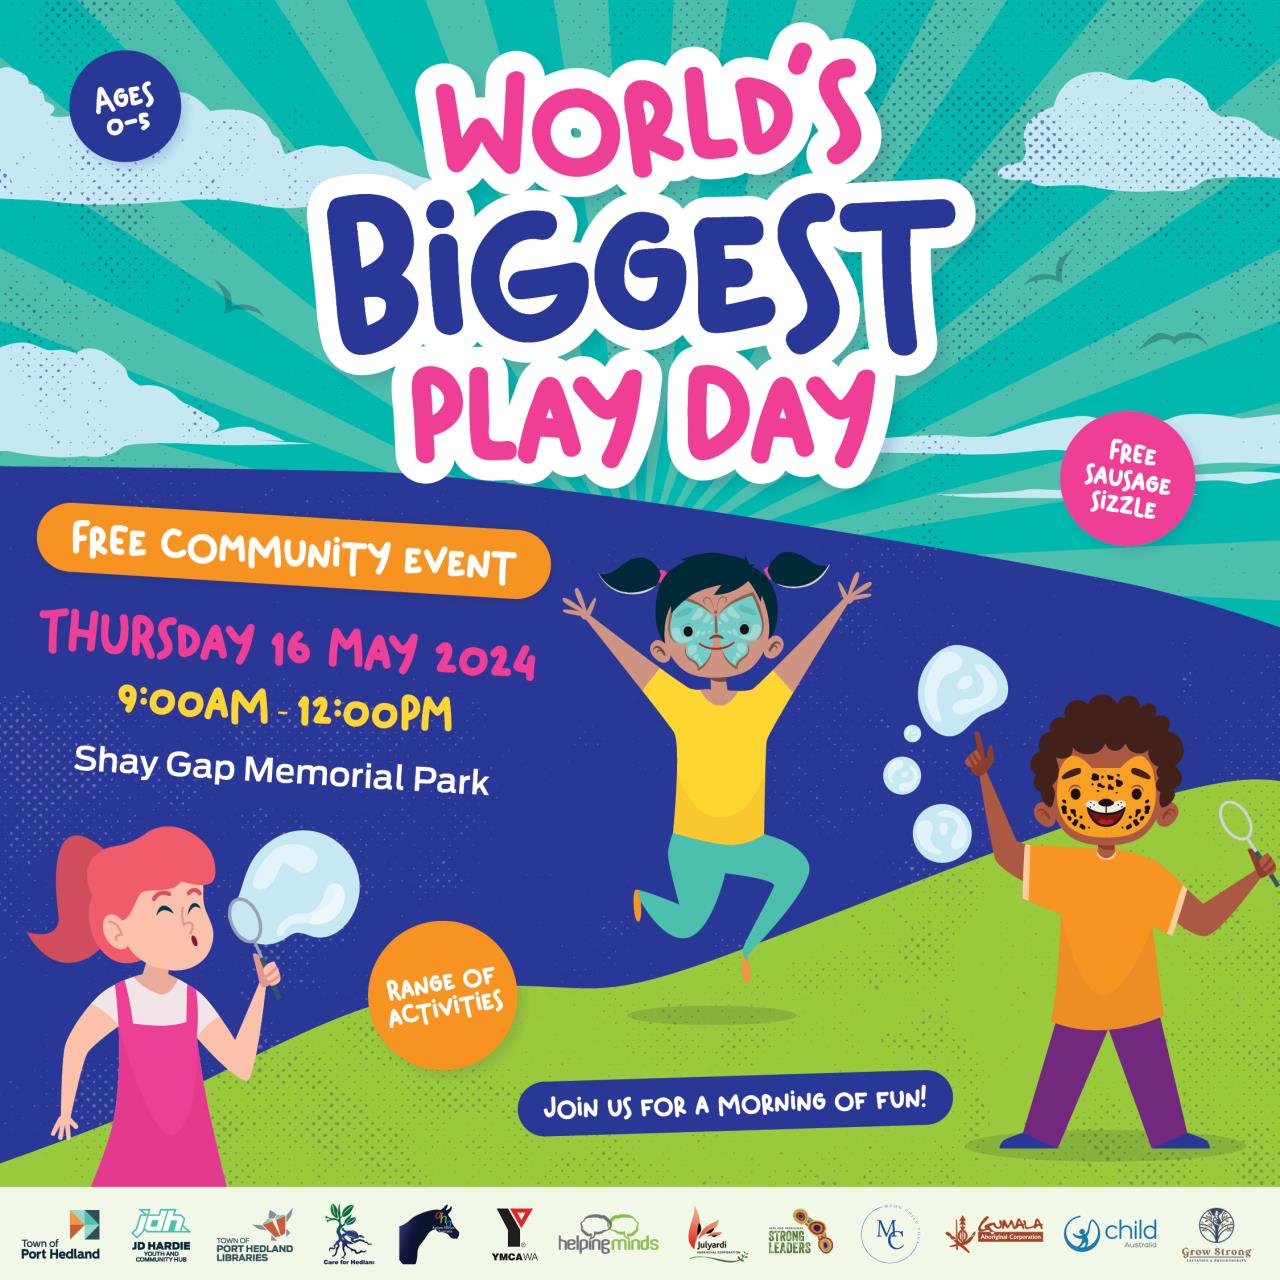 World's Biggest Play Day